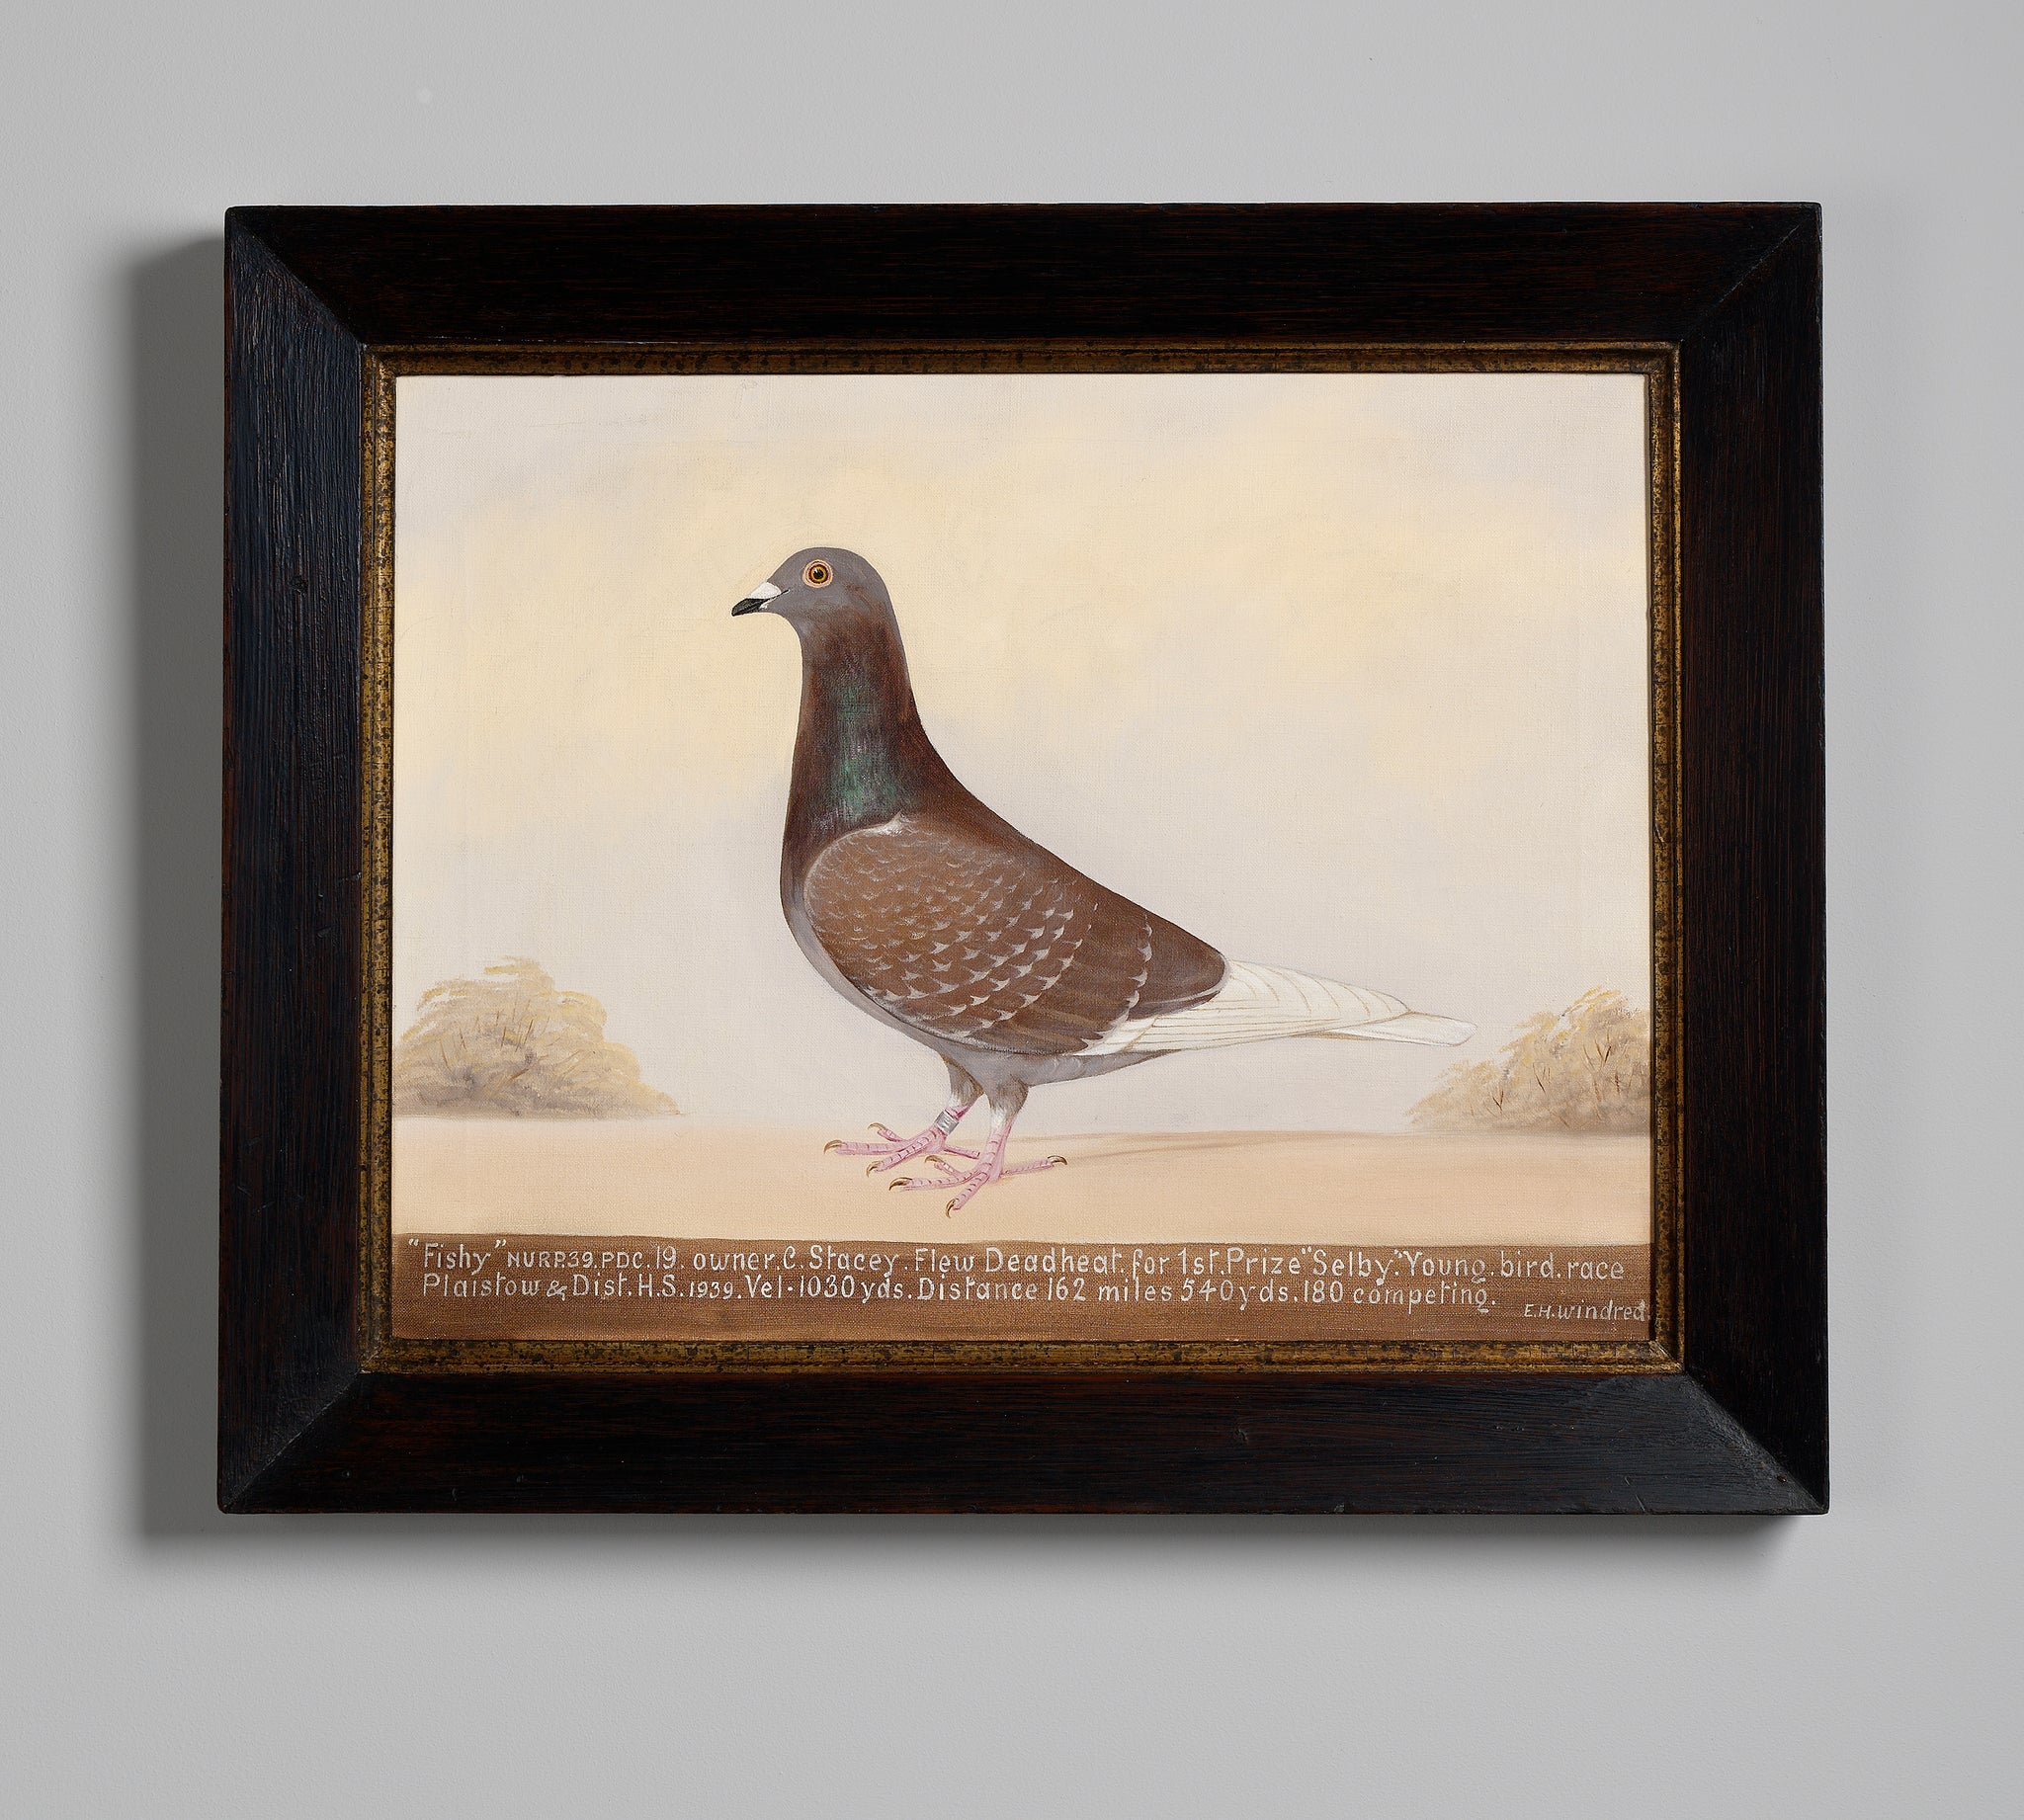 Portrait of The Racing Pigeon “Fishy”